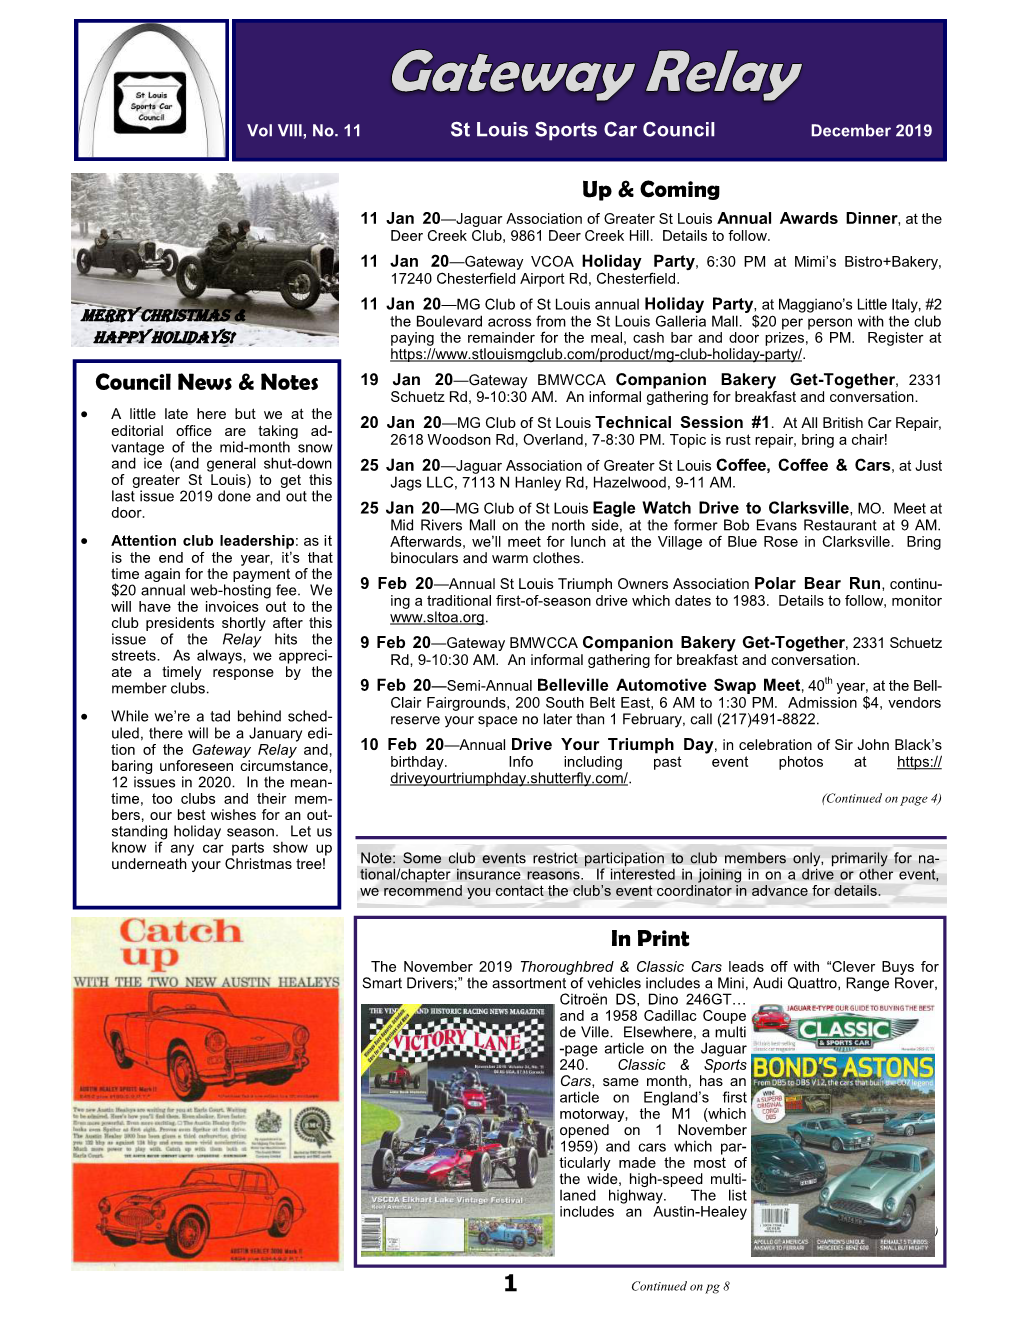 1 Council News & Notes up & Coming in Print